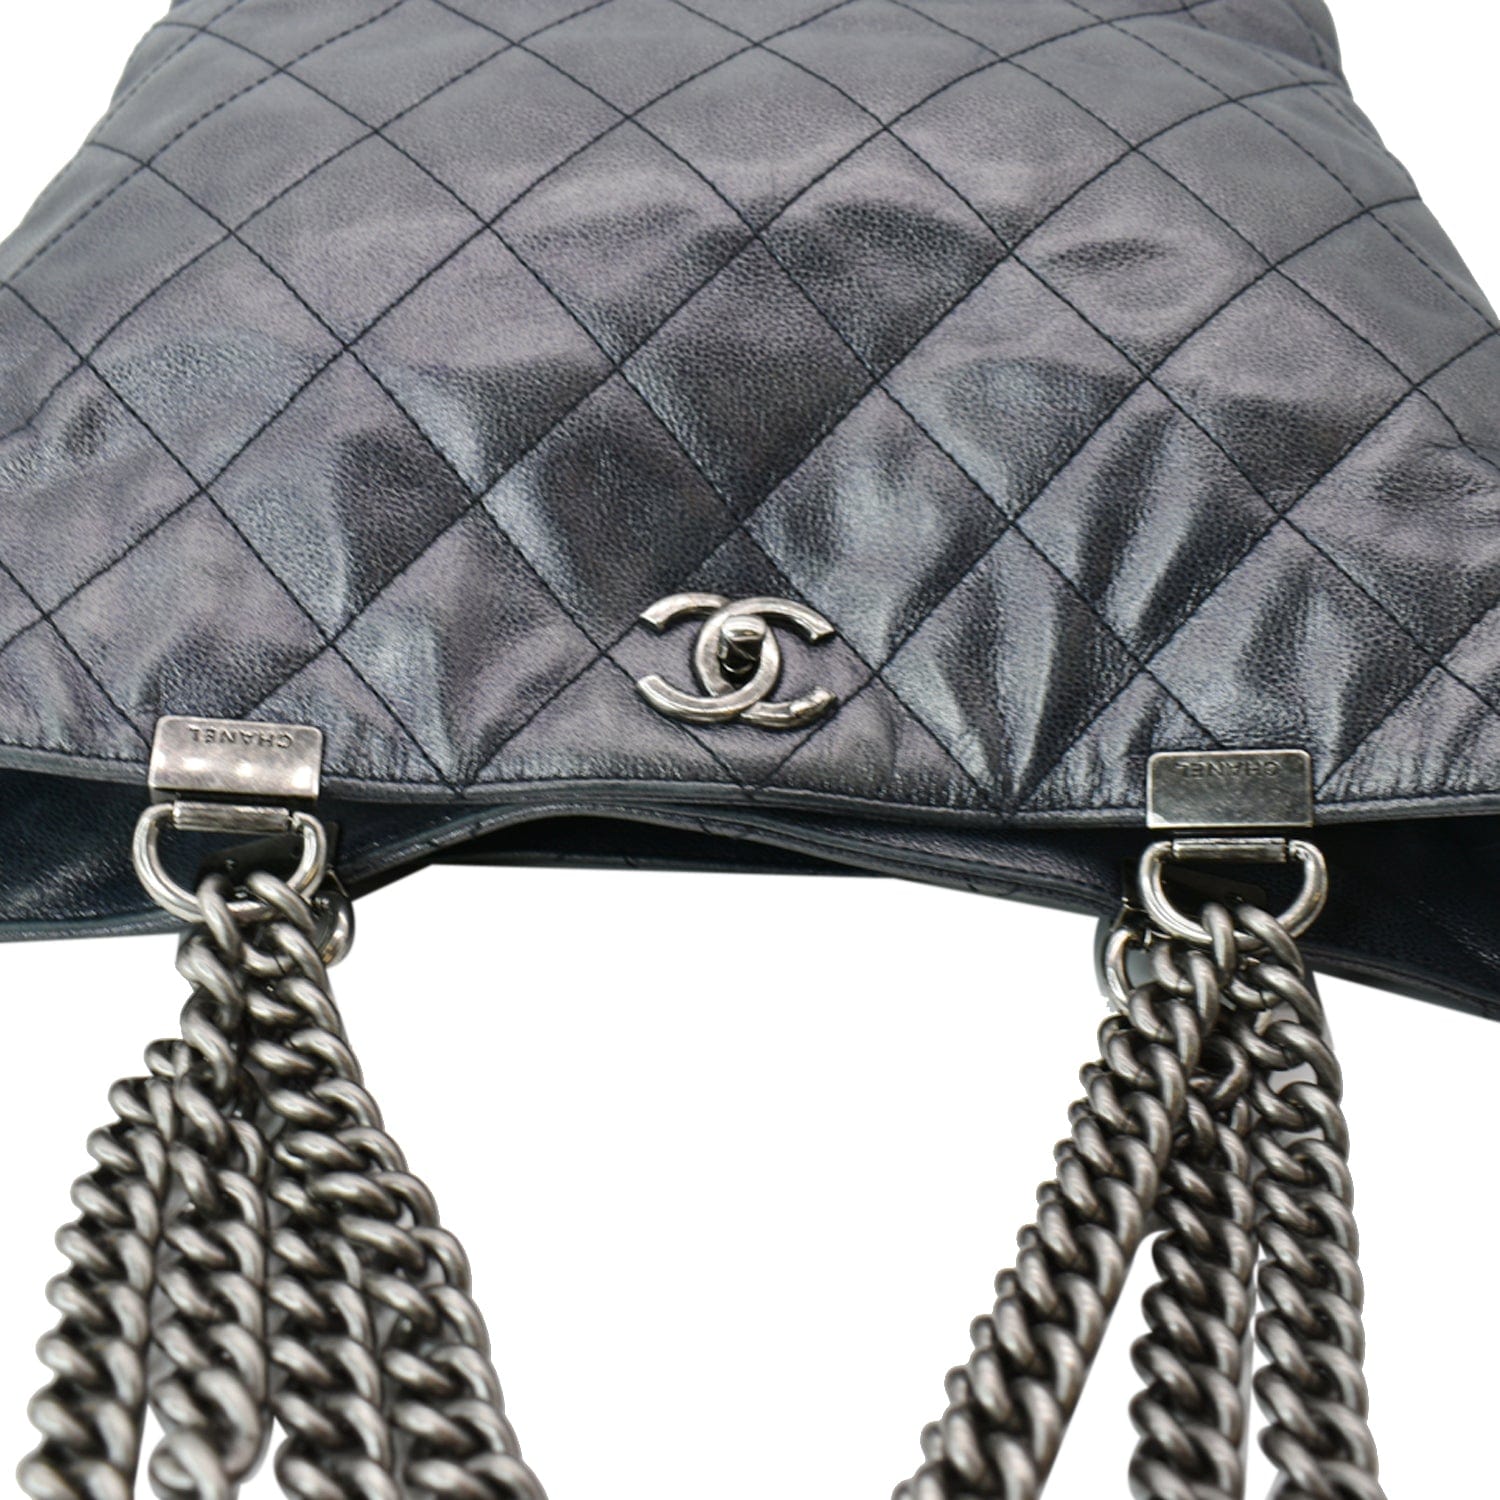 AUTH PRELOVED CHANEL CC Classic Flap Bag Medium Large Chain Around Dove  Grey 20S $4,800.00 - PicClick